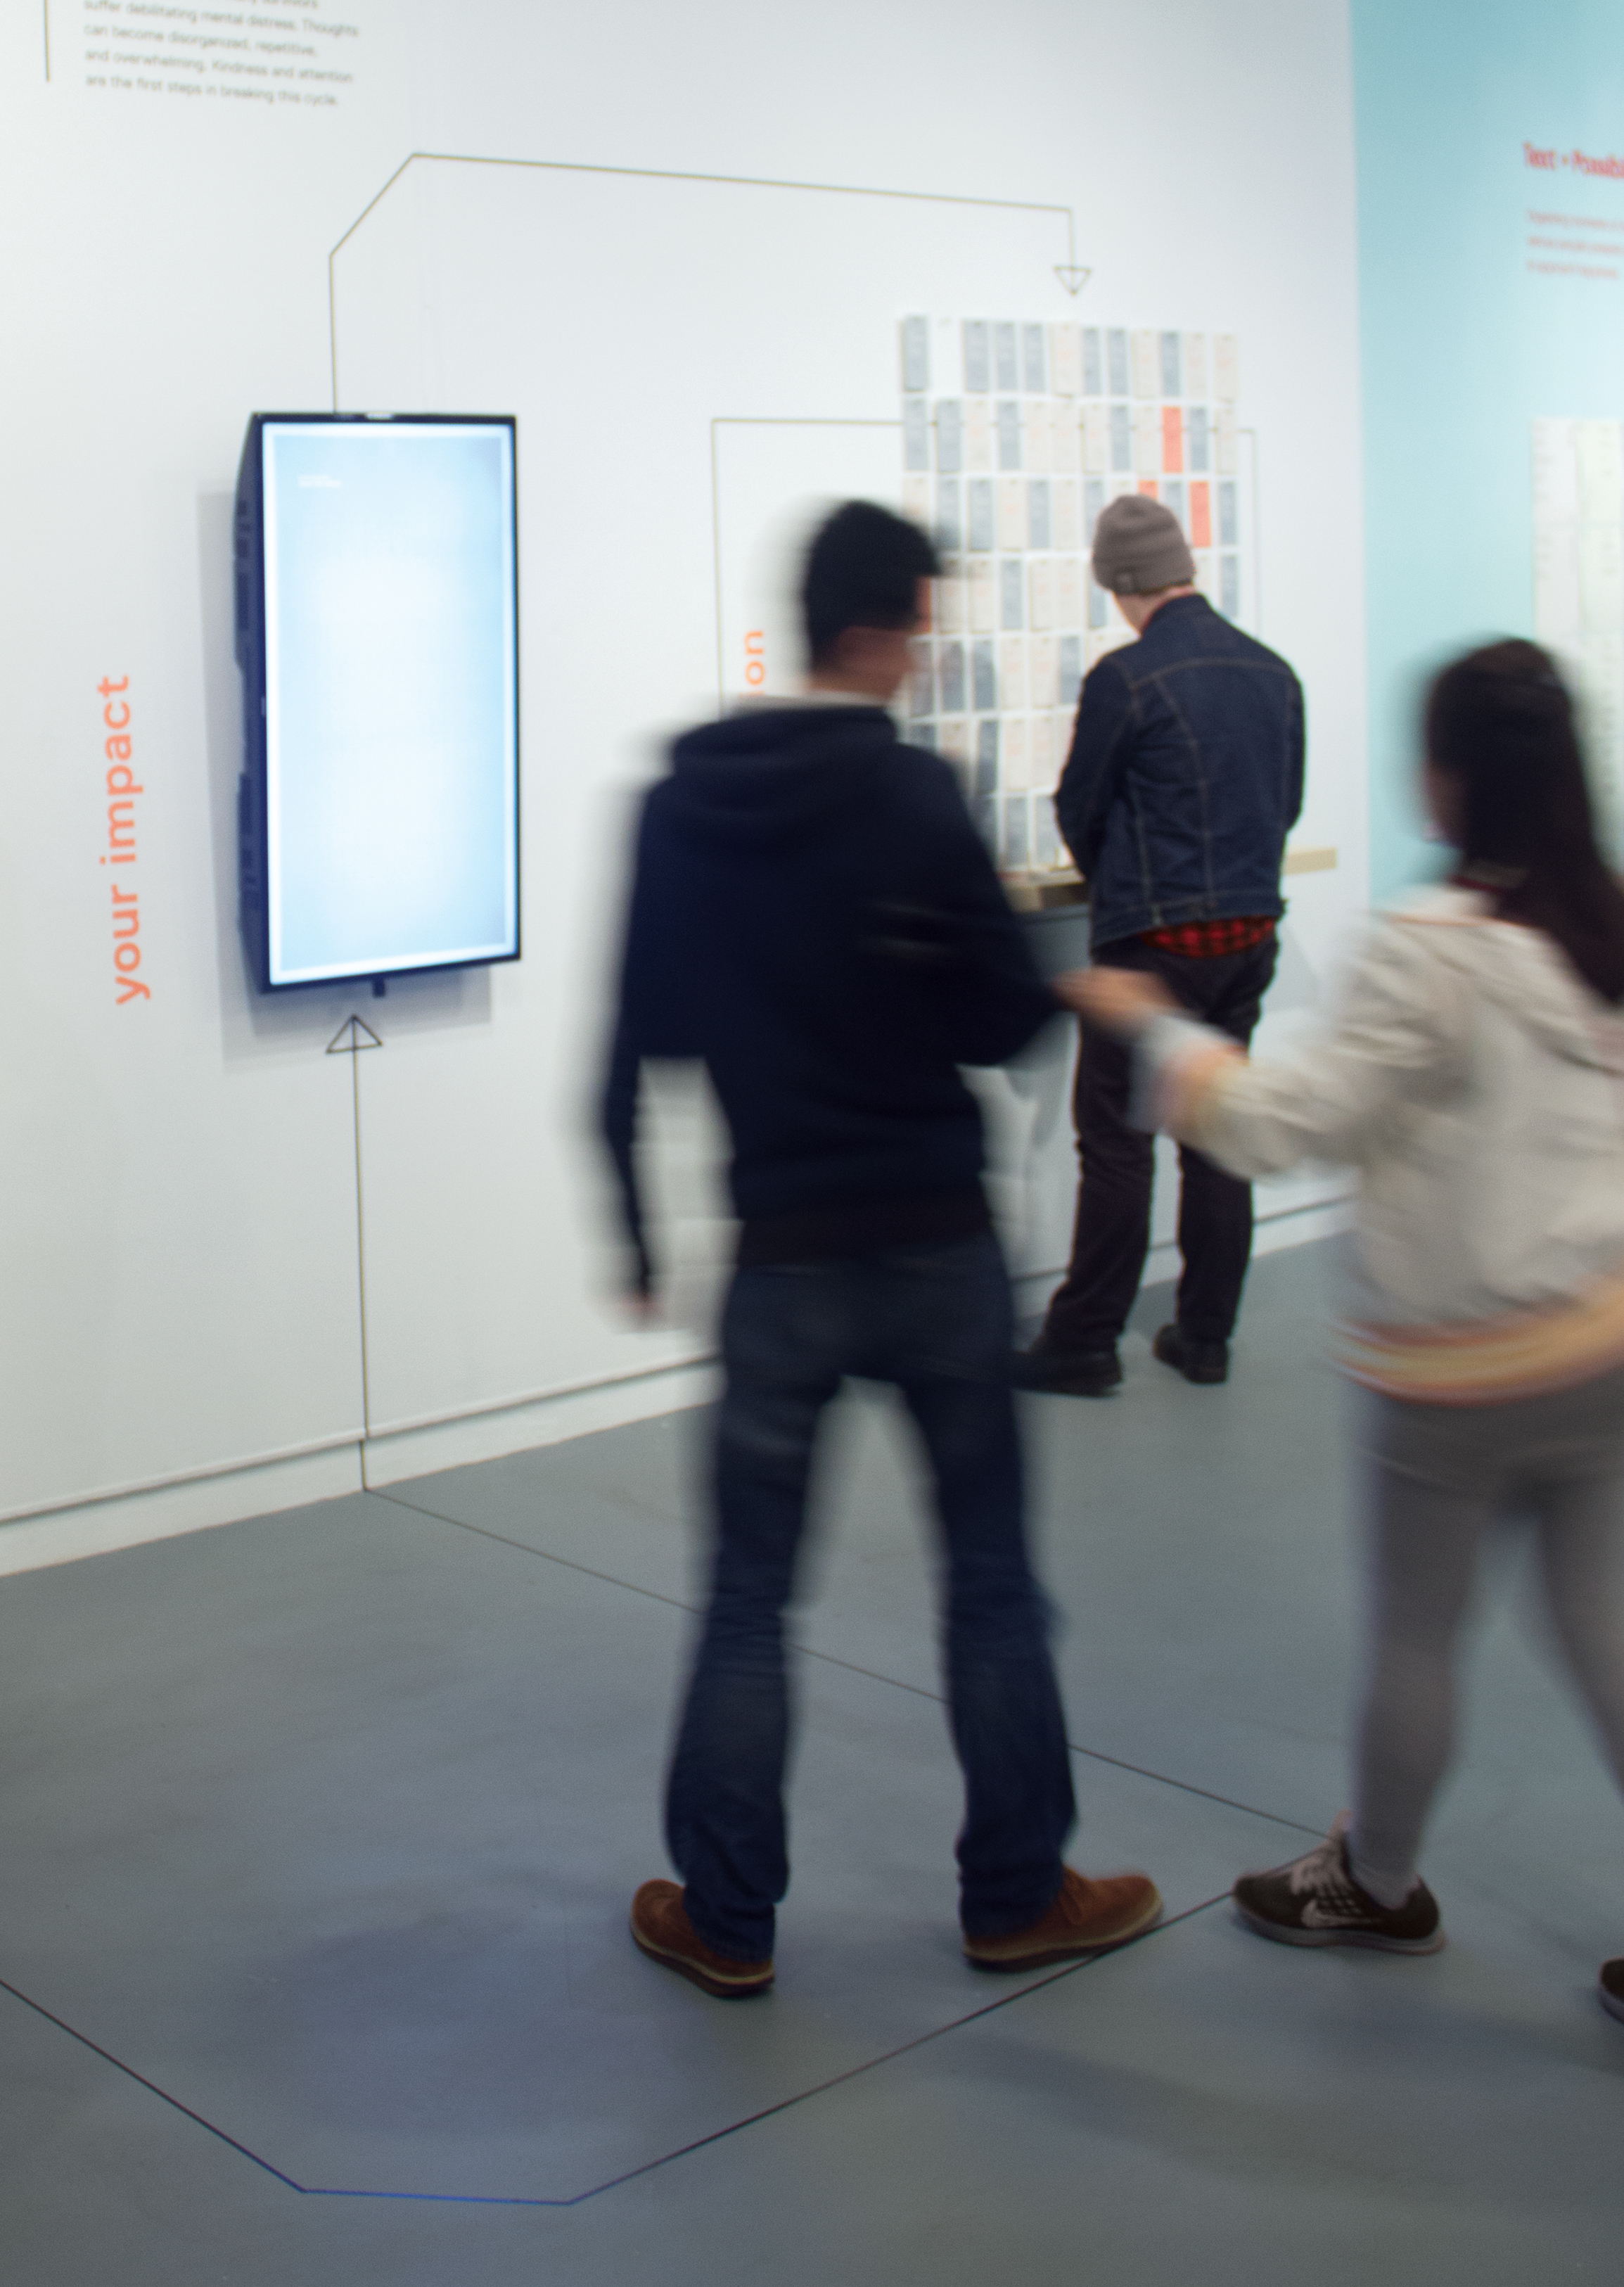 Exhibition visitors approach the interactive screen.